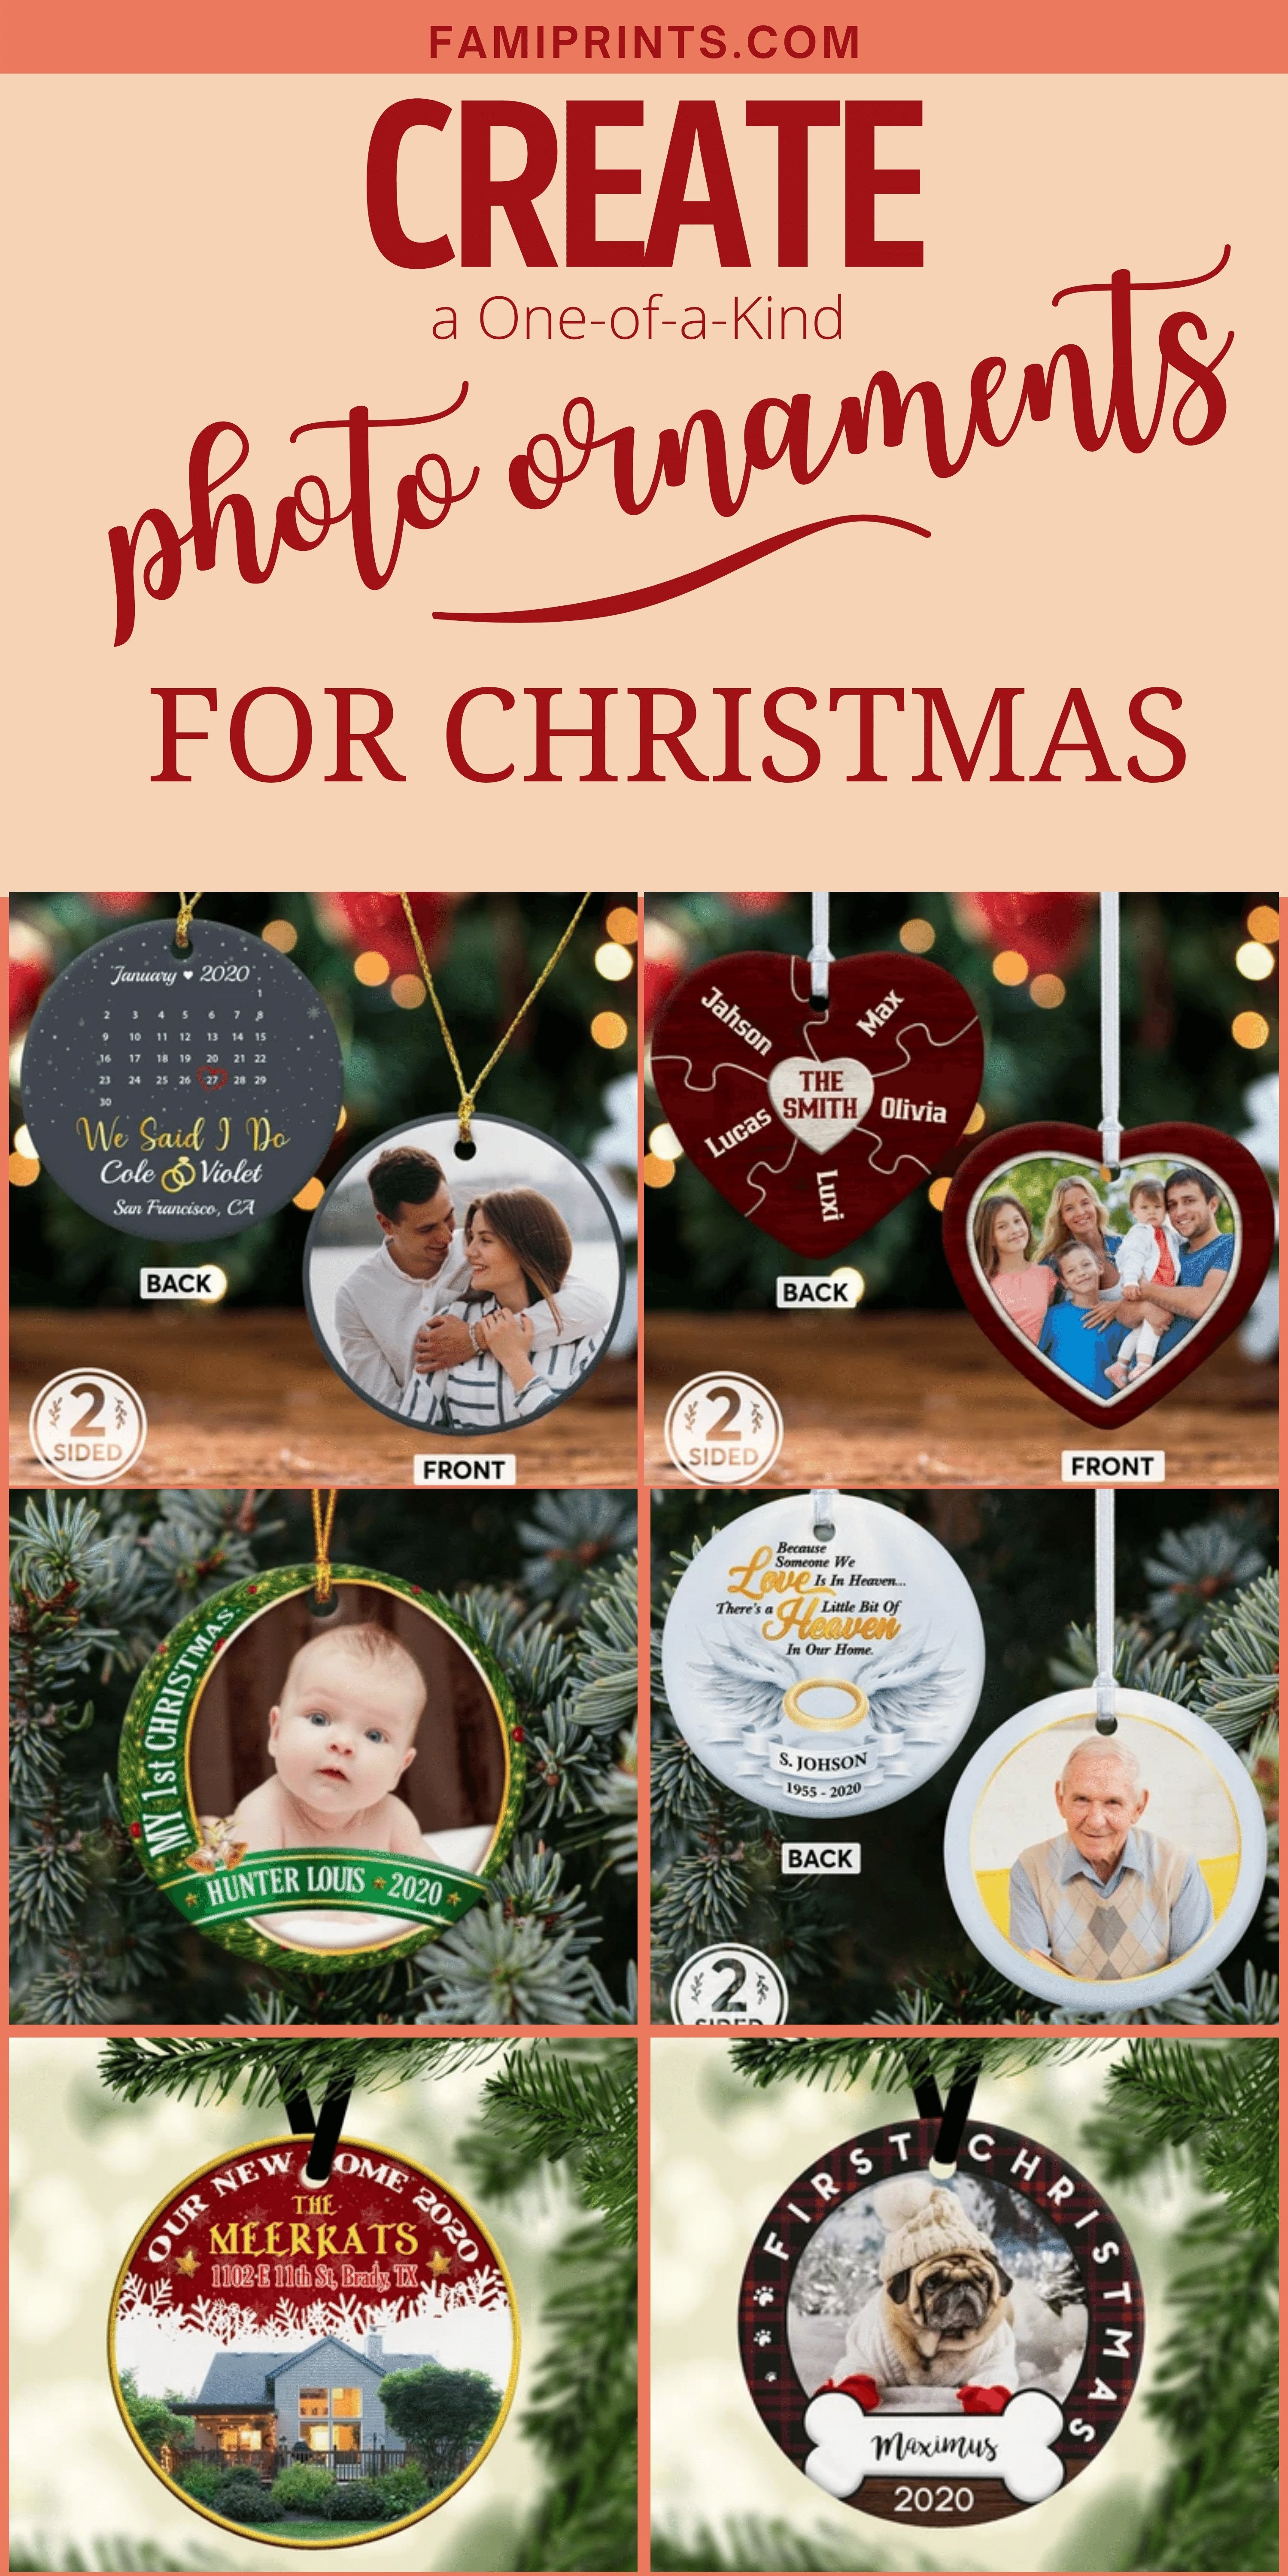 Personalized Christmas Photo Ornaments | FamiPrints | Trending Personalized Family Gifts